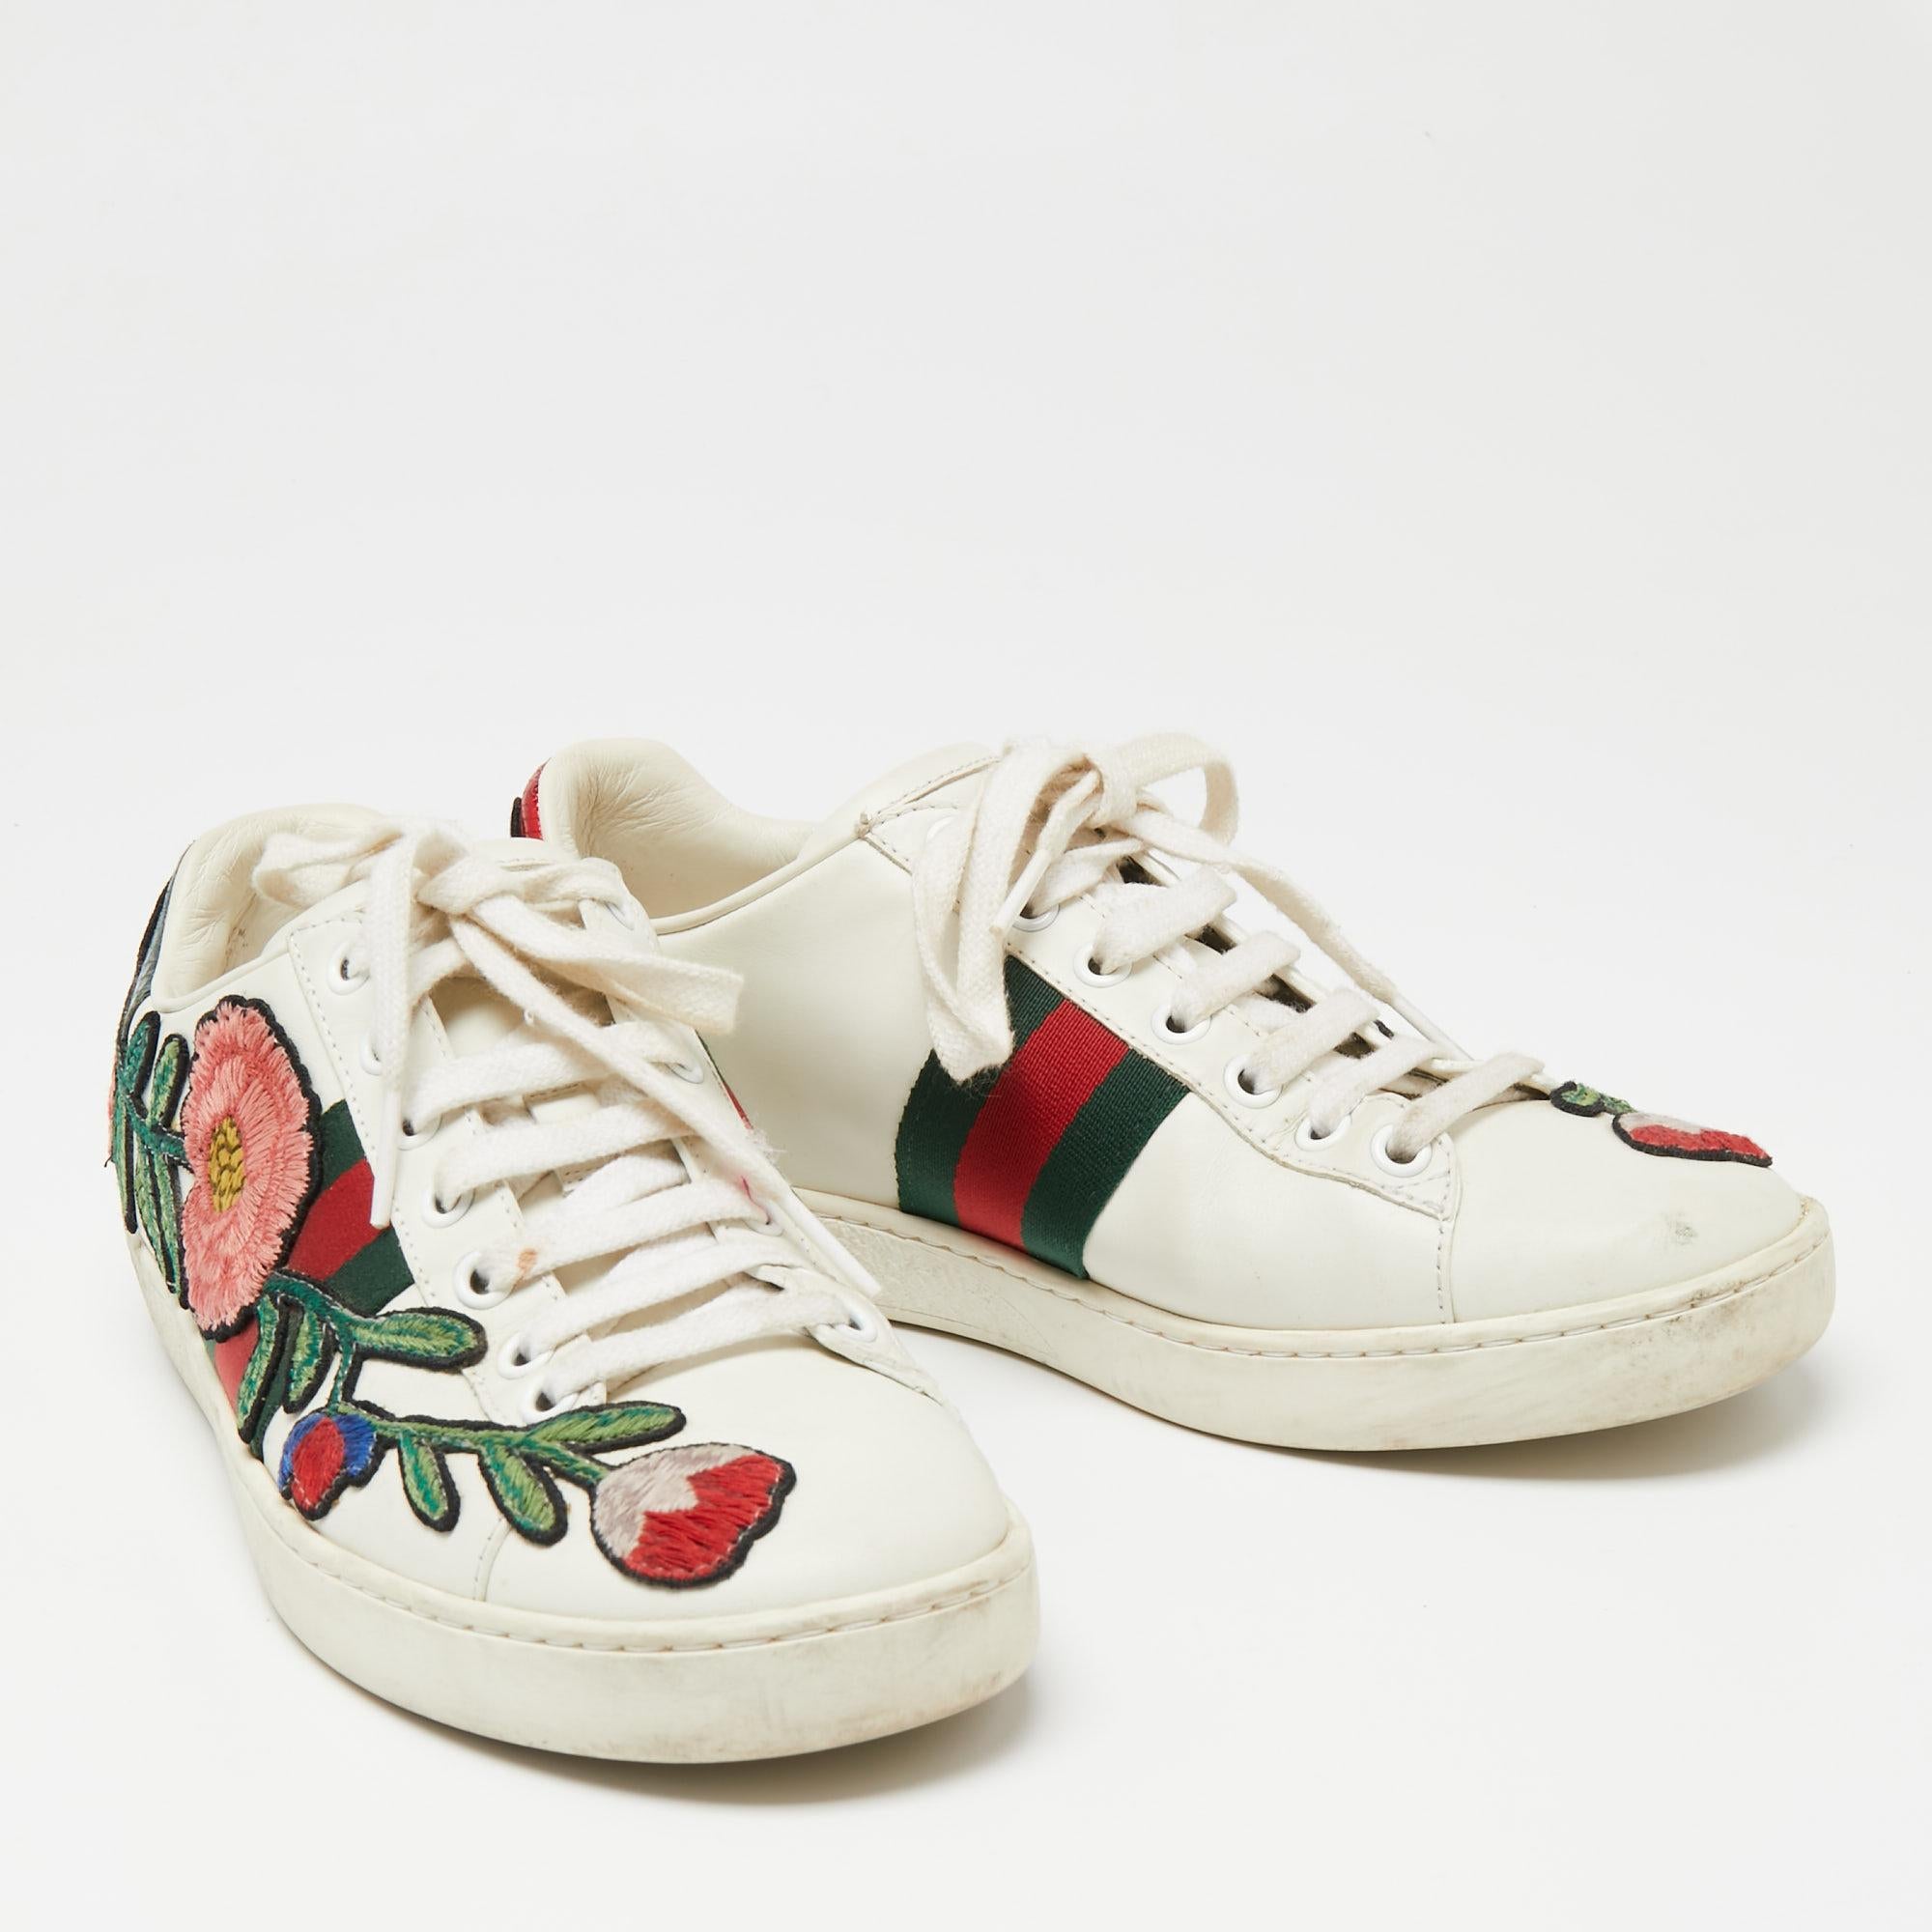 gucci colorful sneakers